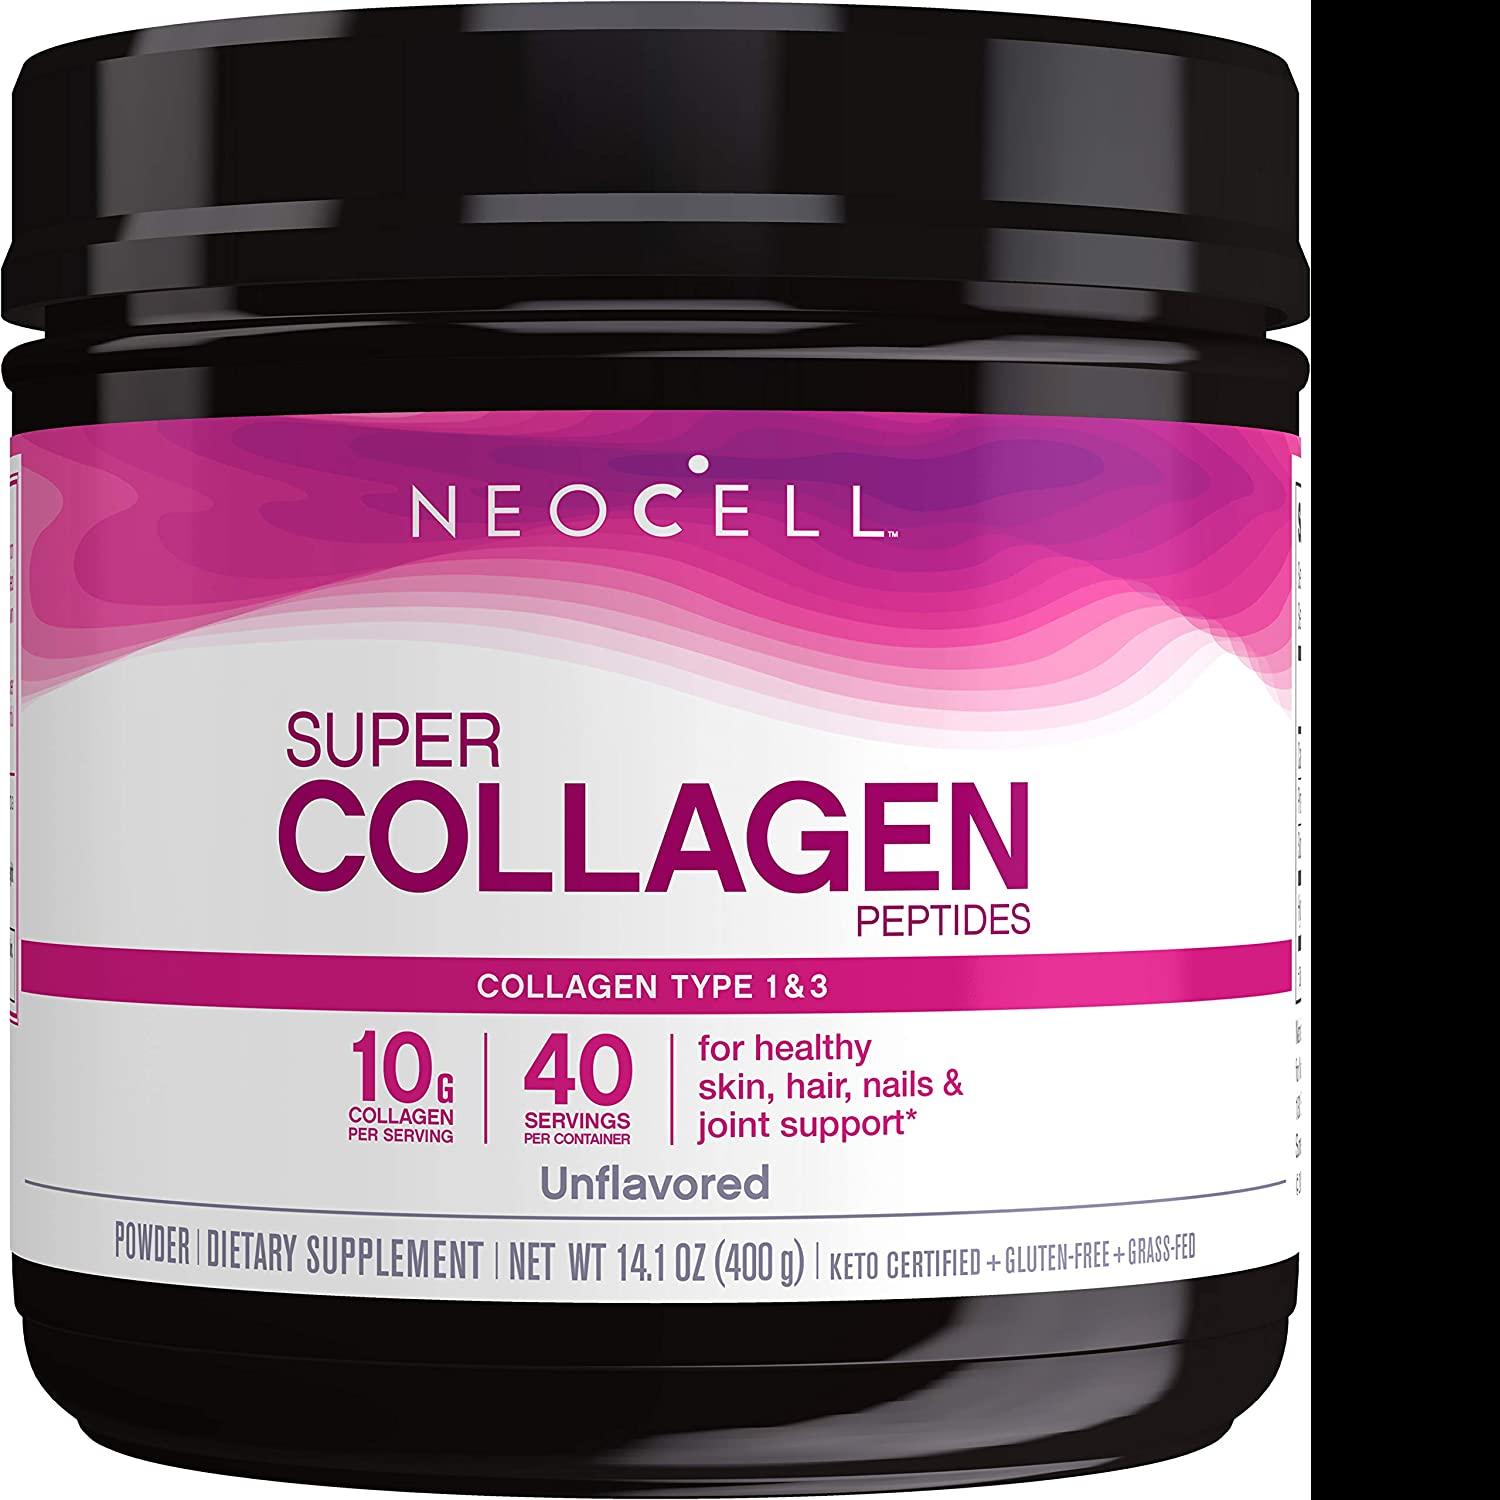 NeoCell Super Collagen Powder for $15.21 Shipped